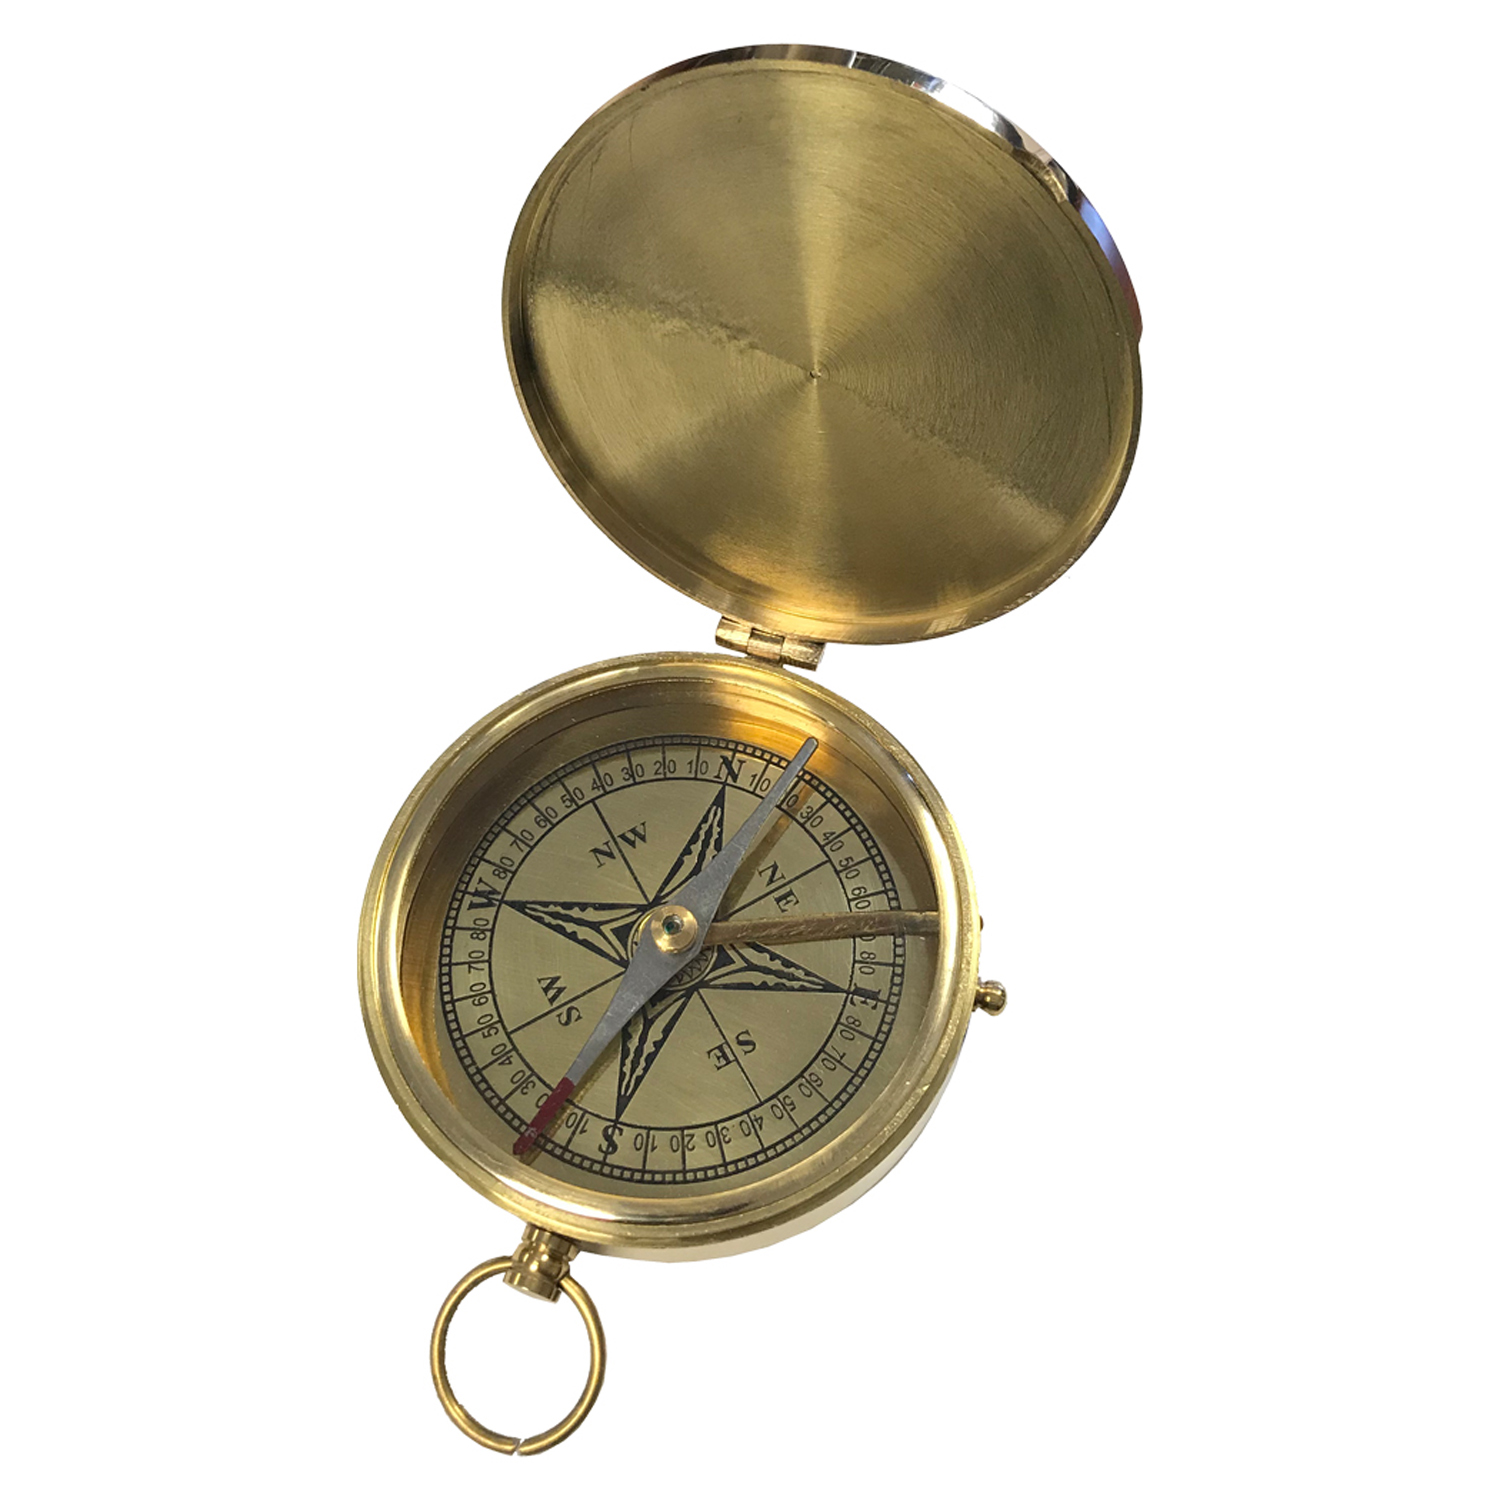 3 Solid Polished Brass Pocket Sundial Compass Antique Reproduction With Lid  -  Canada